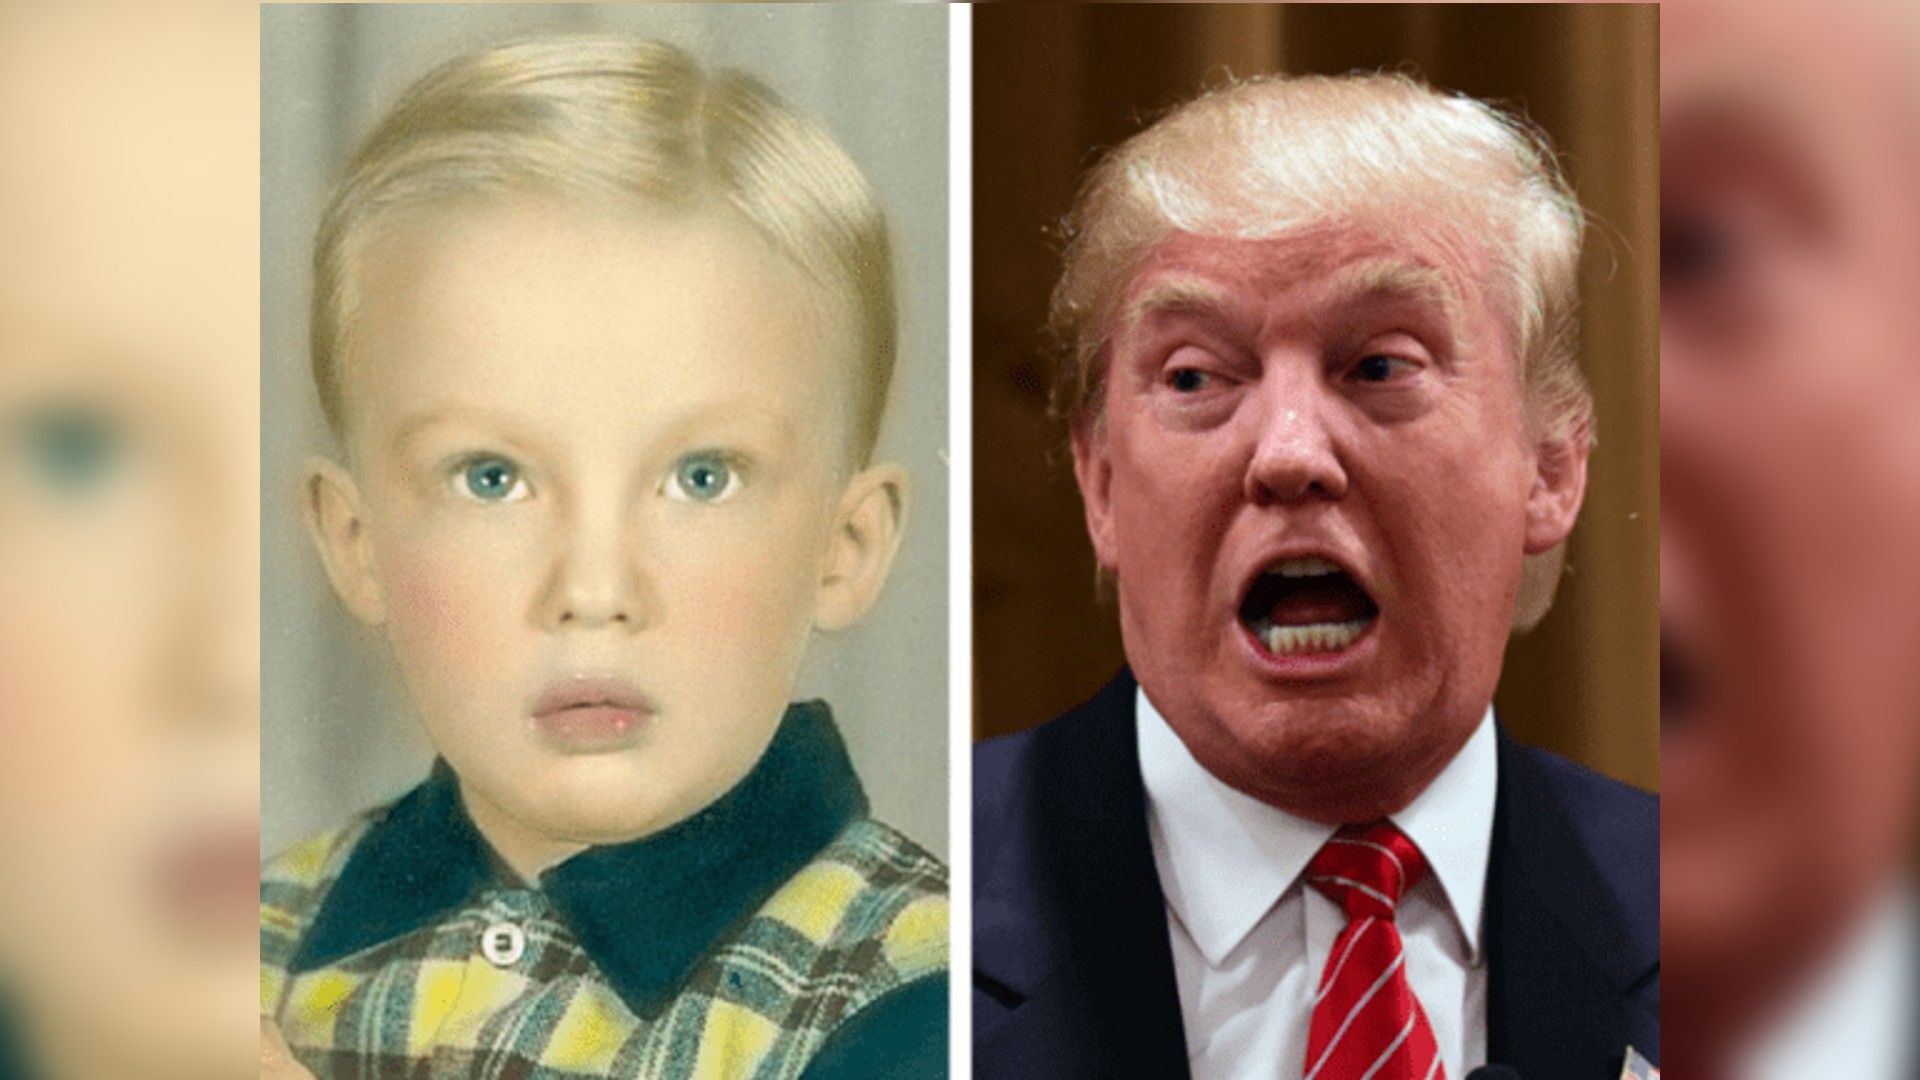 Donald Trump as a child and now